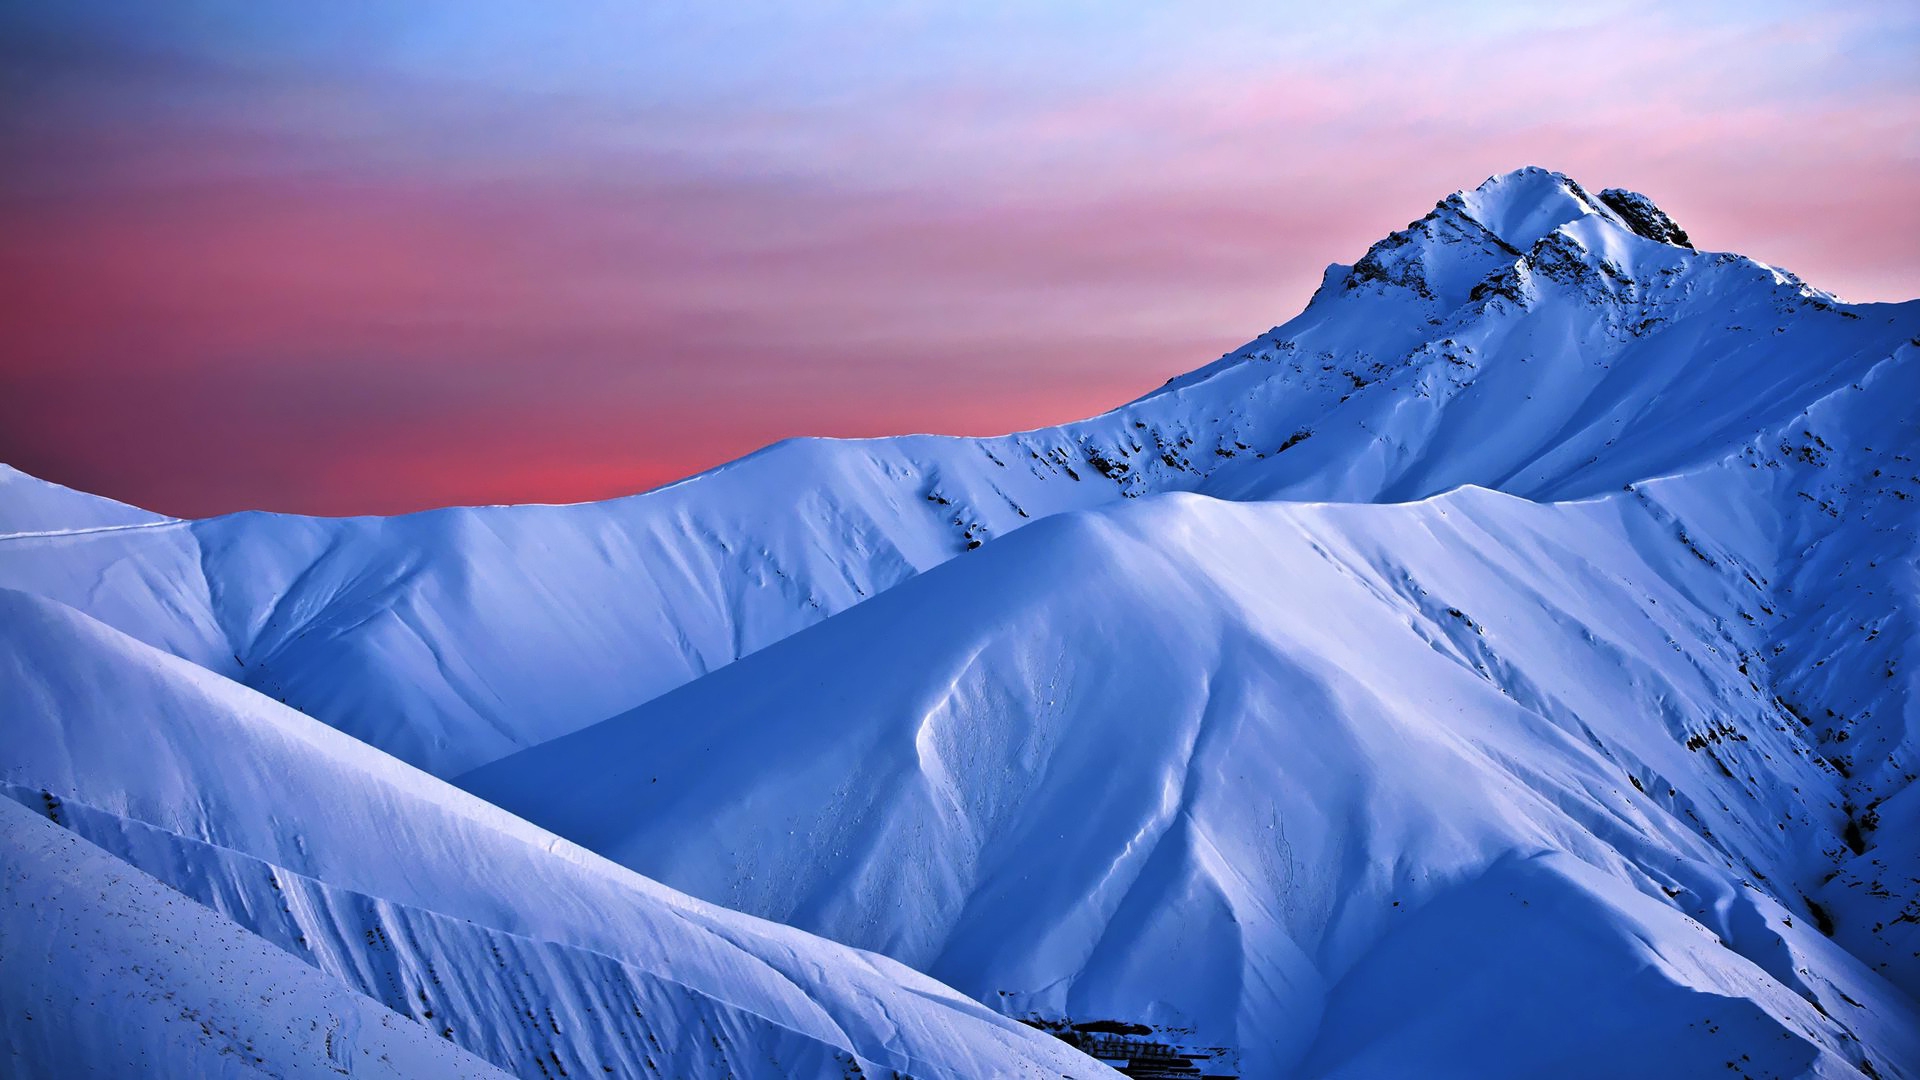 Snowy Mountains Backgrounds Download Free - Sunset Over Snowy Mountains , HD Wallpaper & Backgrounds